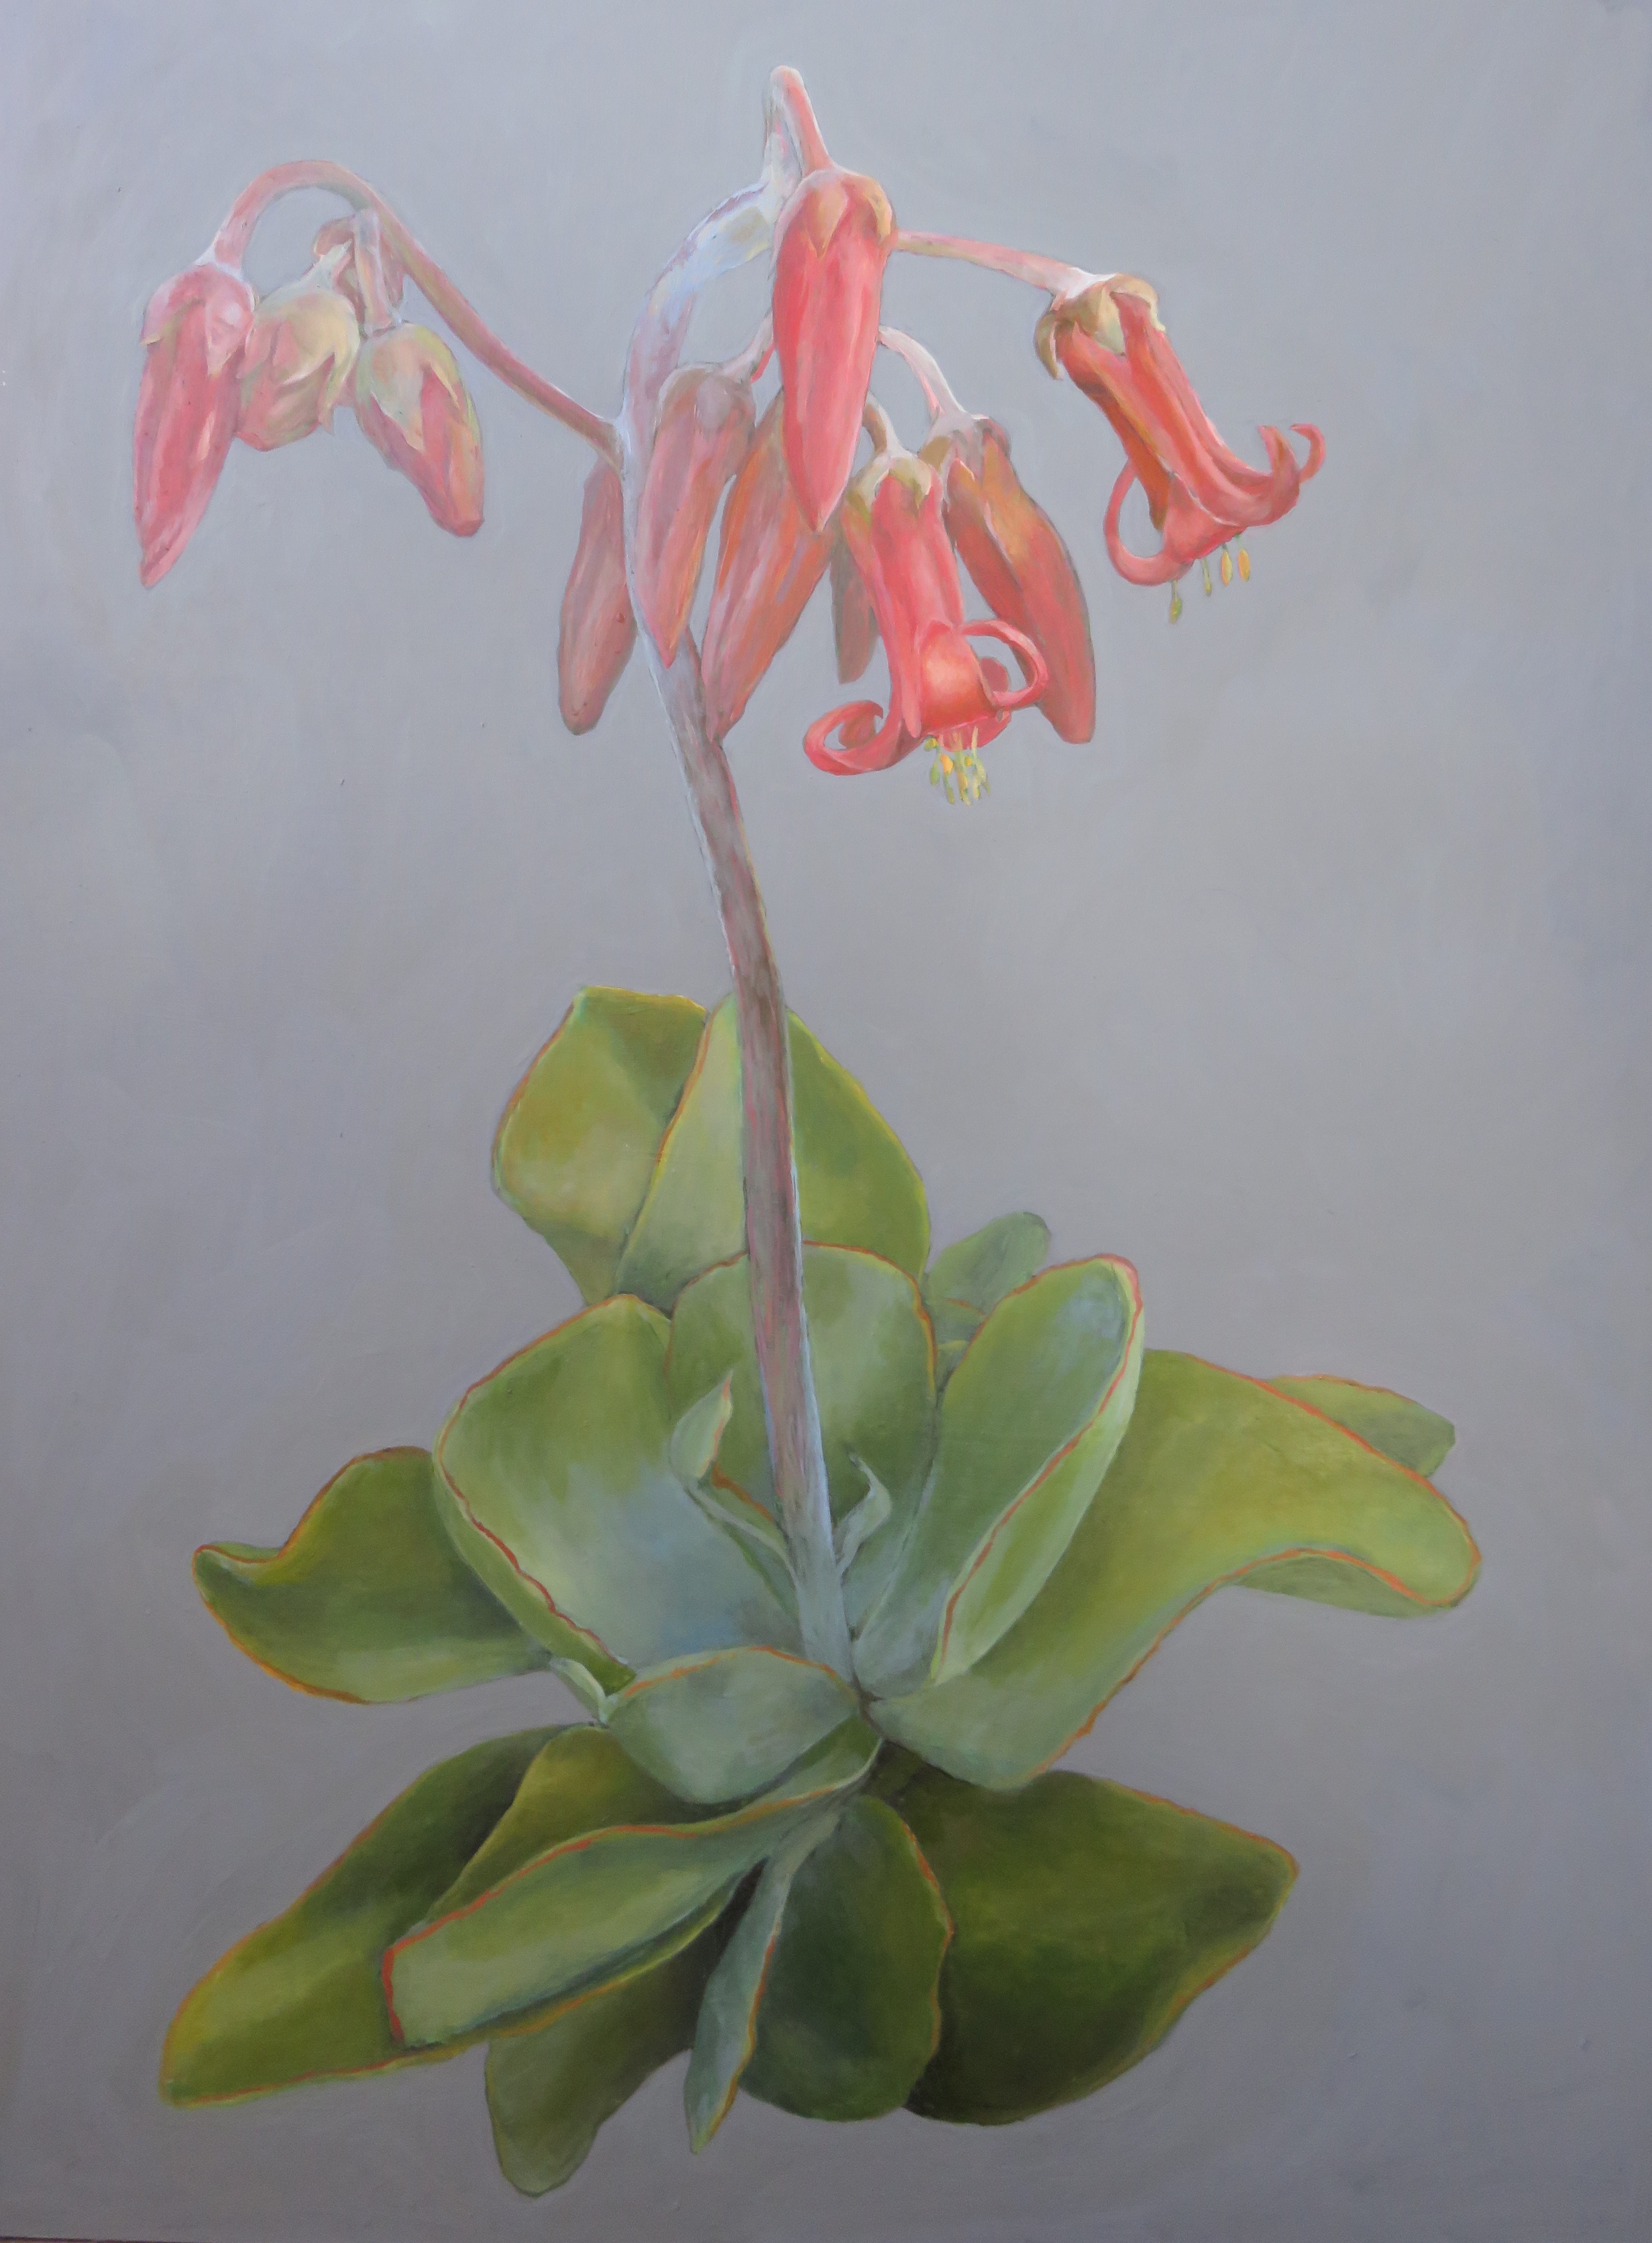 Cotyledon orbiculata, native medicinal herbs of South Africa 60 x 80 cm (23 x 31 inch) painting in acrylic on board.